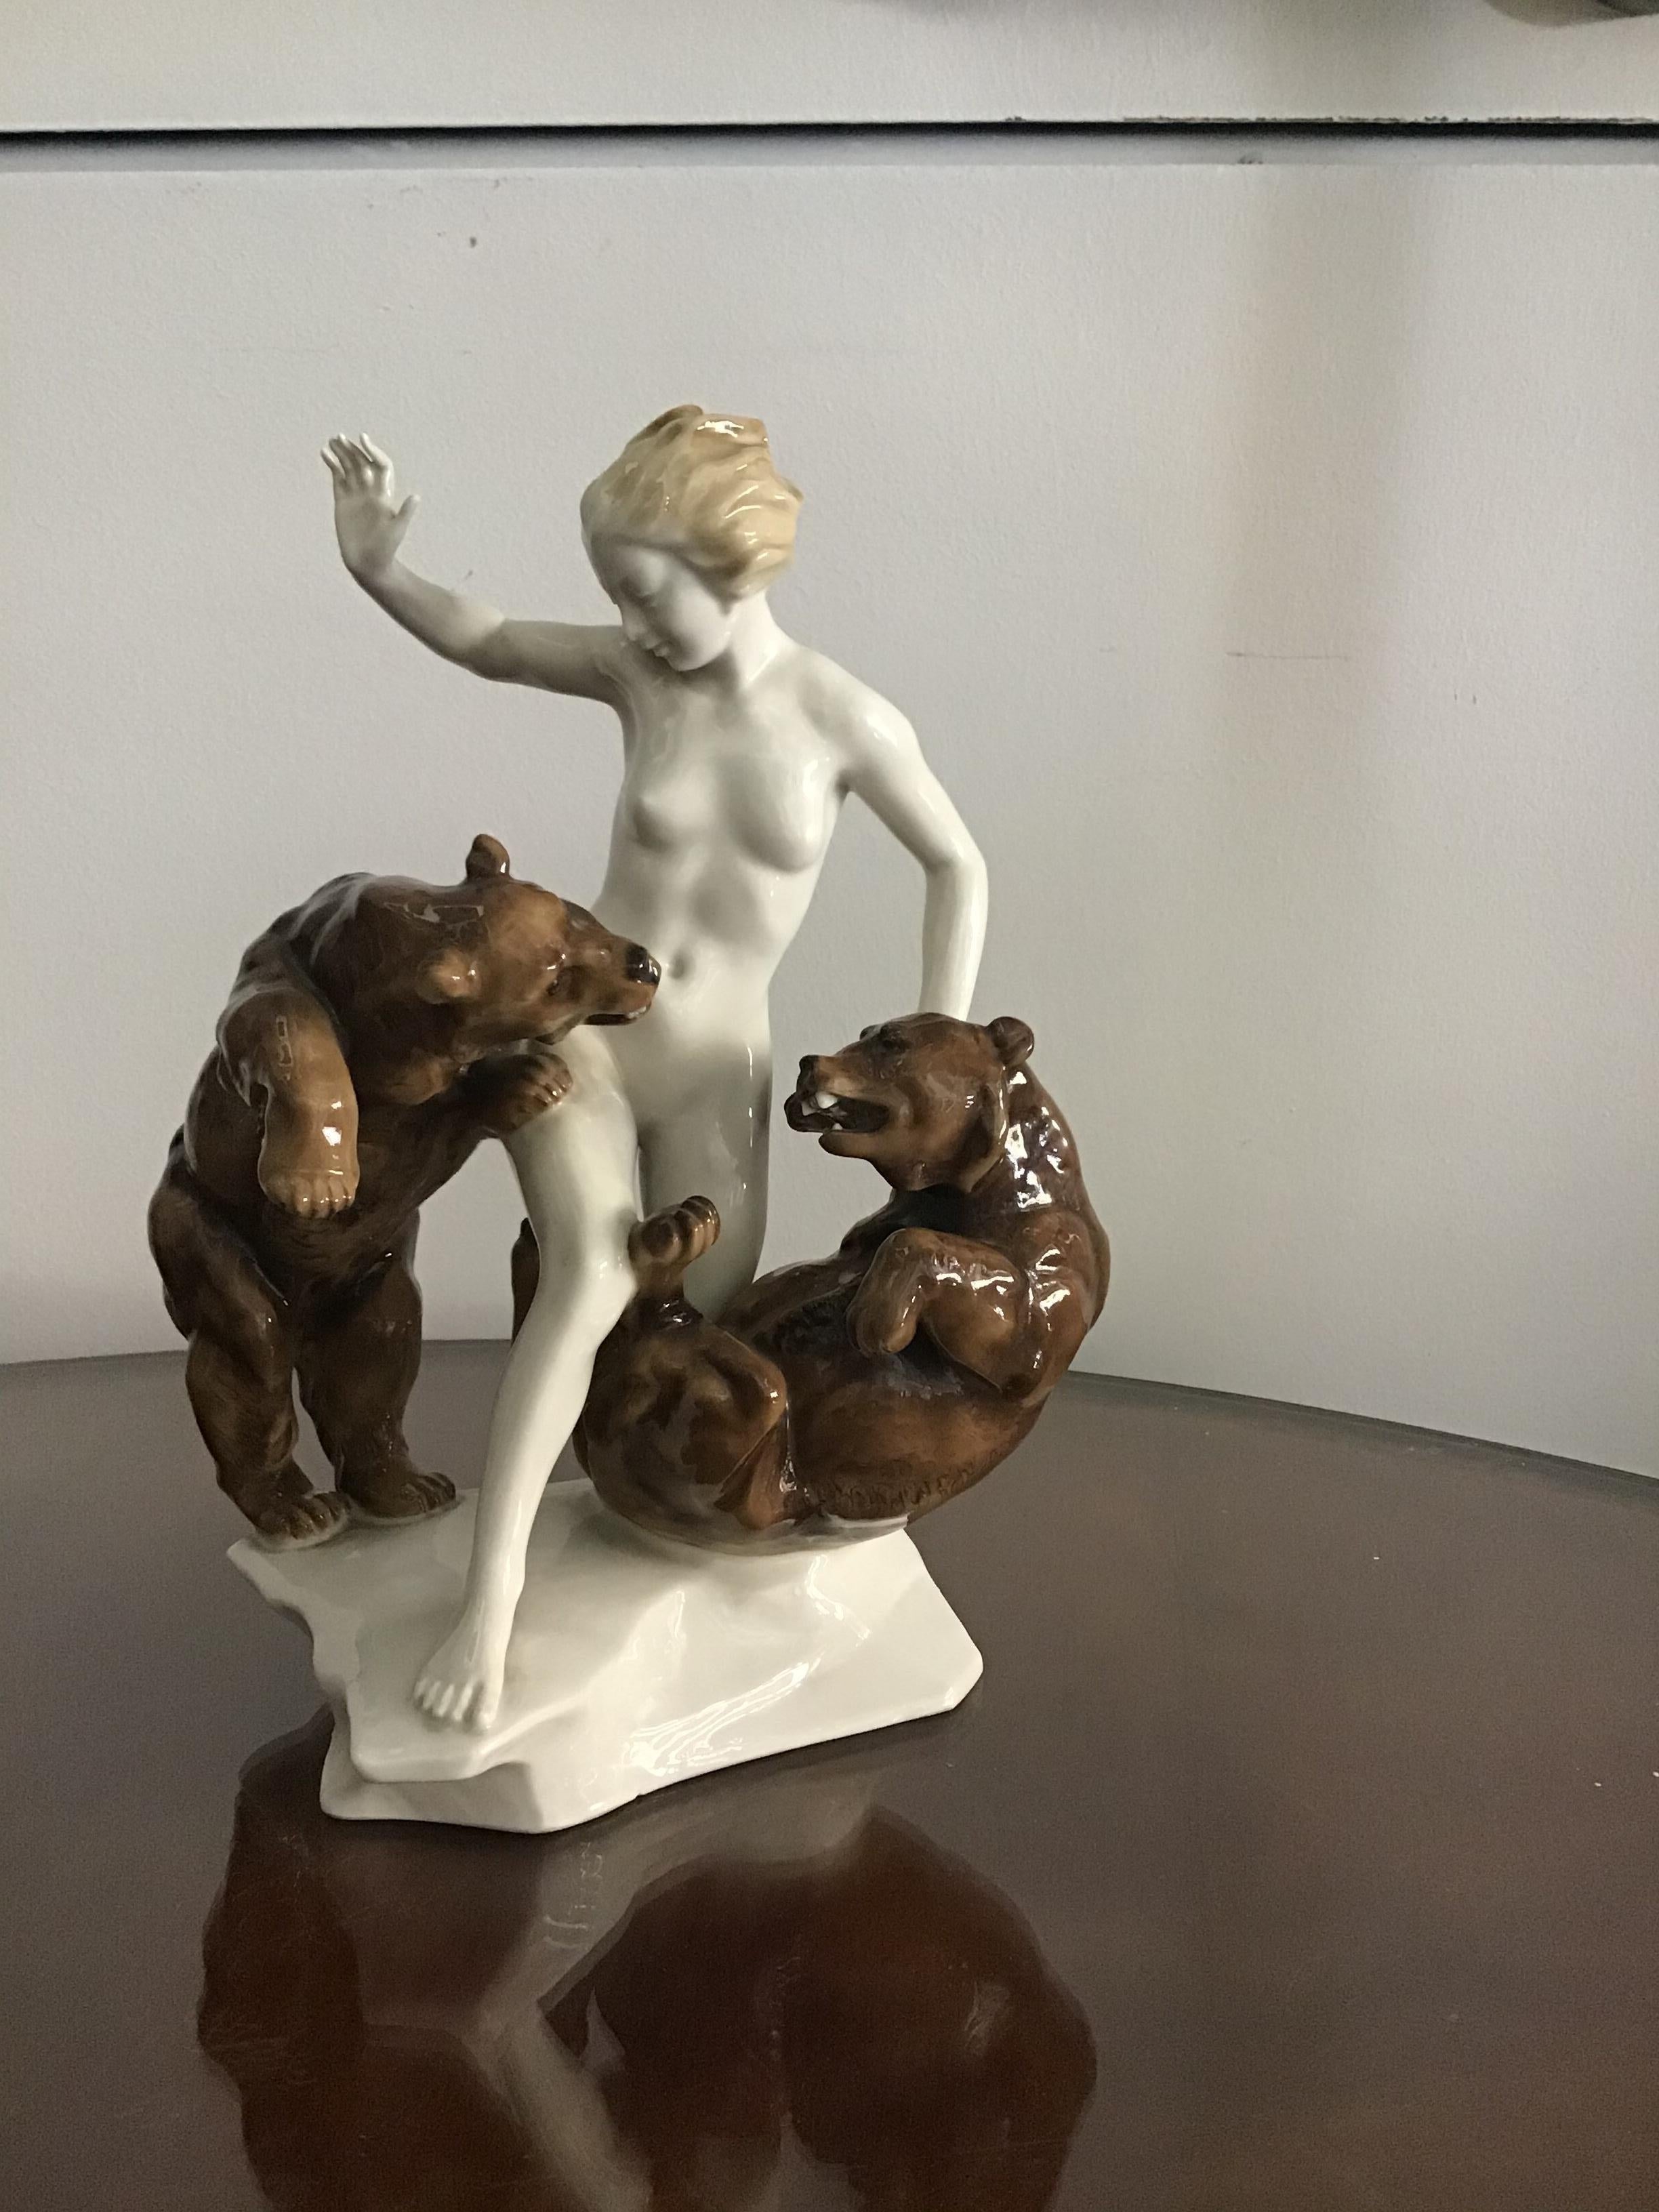 K.Tutter “Woman with Bears” Porcelain, 1940, Germany  For Sale 3